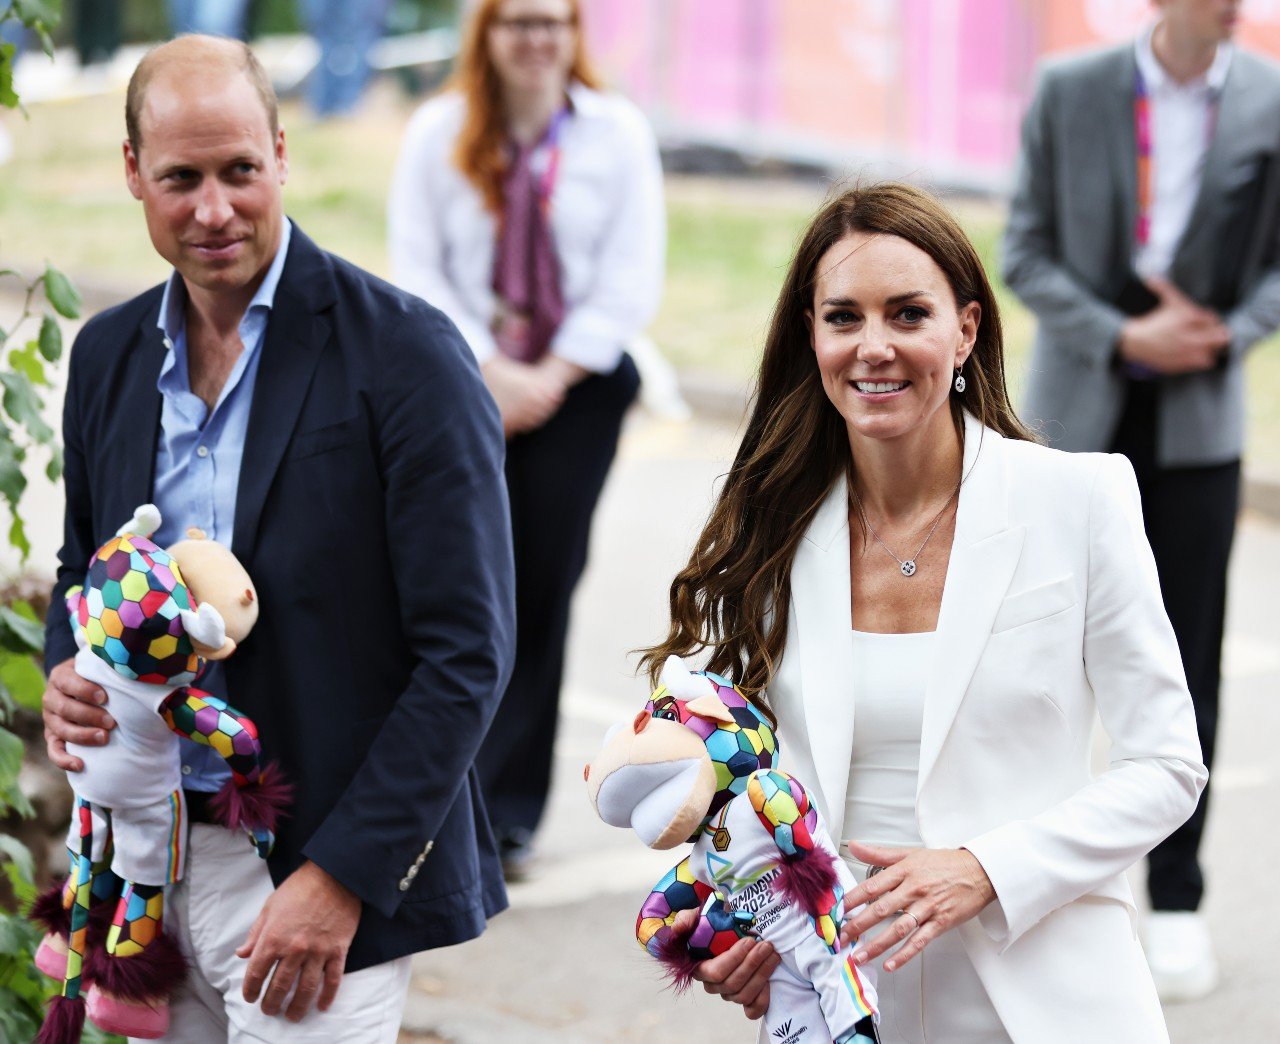 Prince William and Kate Middleton attend an event. 